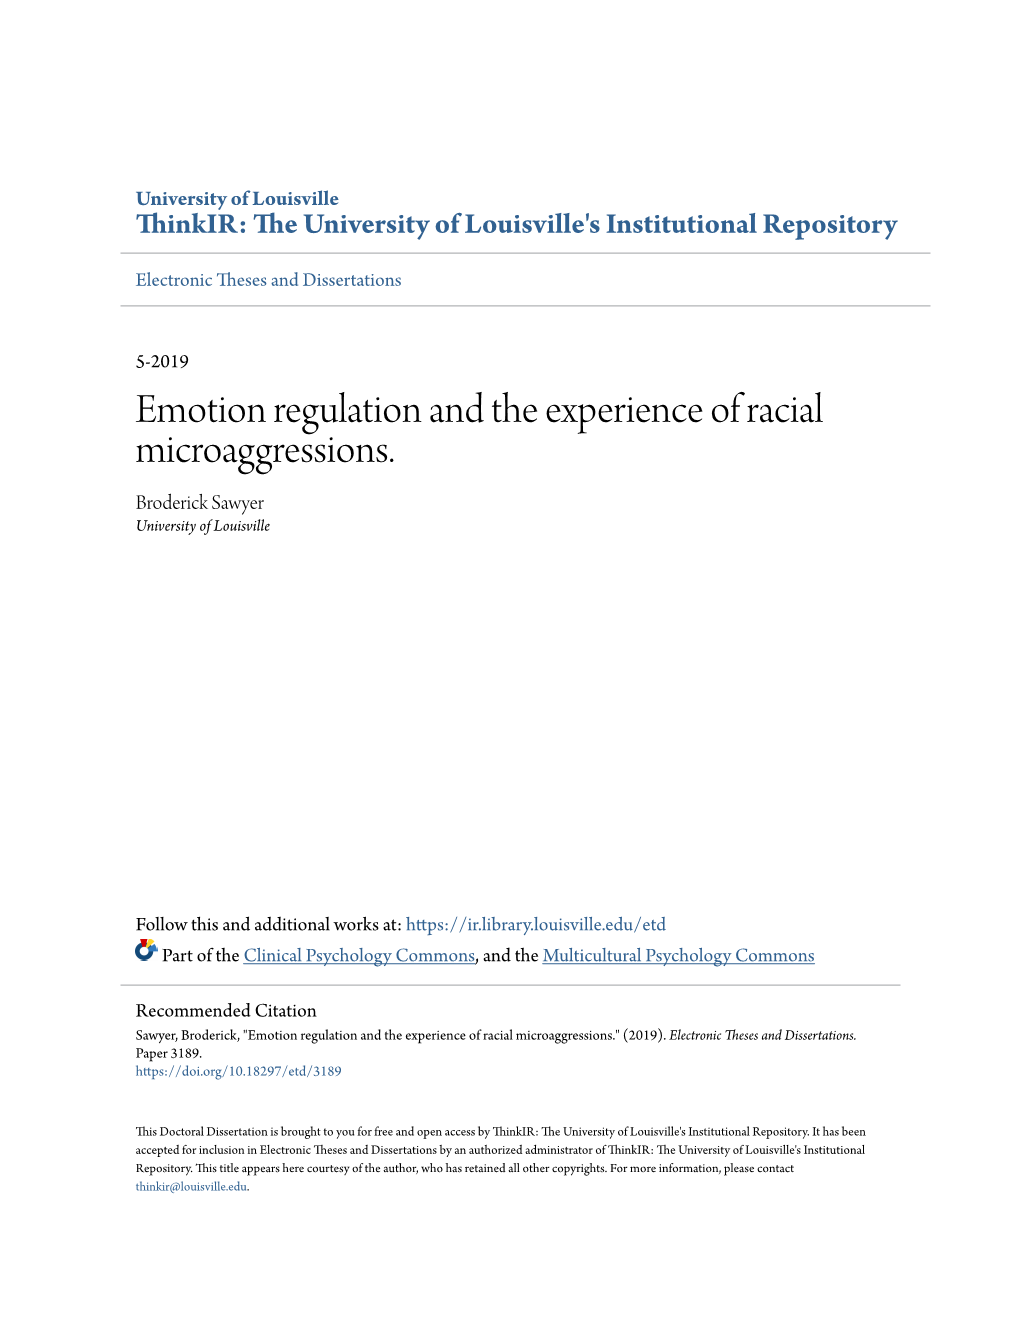 Emotion Regulation and the Experience of Racial Microaggressions